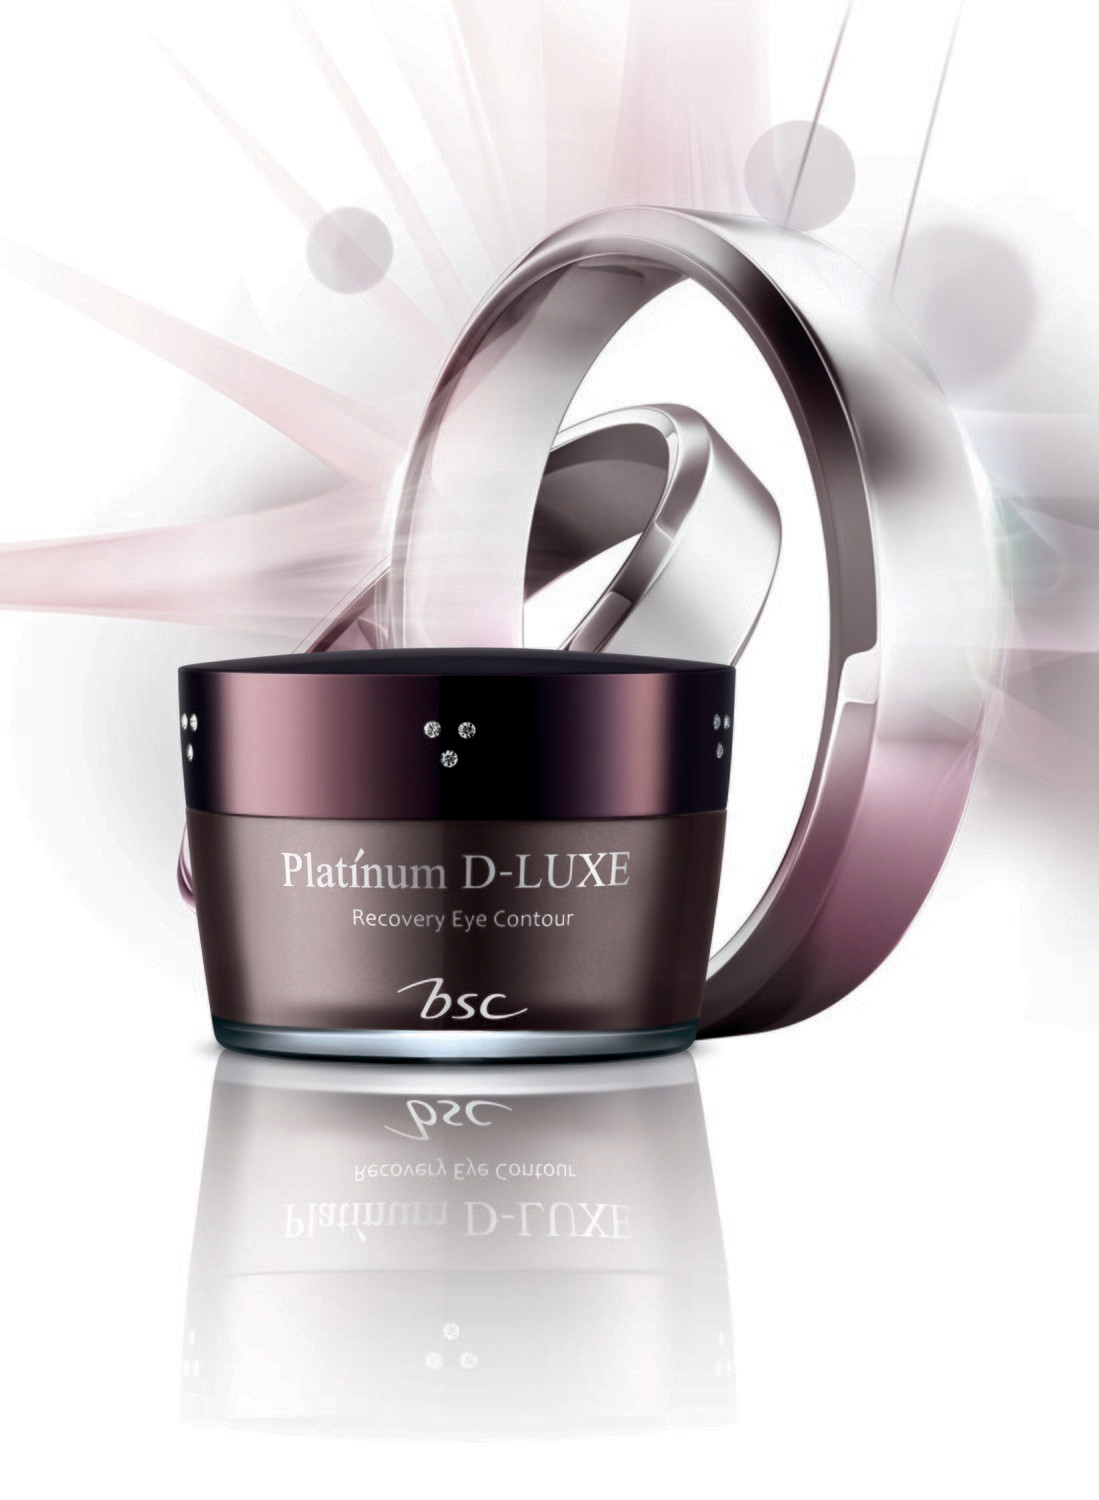 PLATINUM D-LUXE RECOVERY EYE CONTOUR